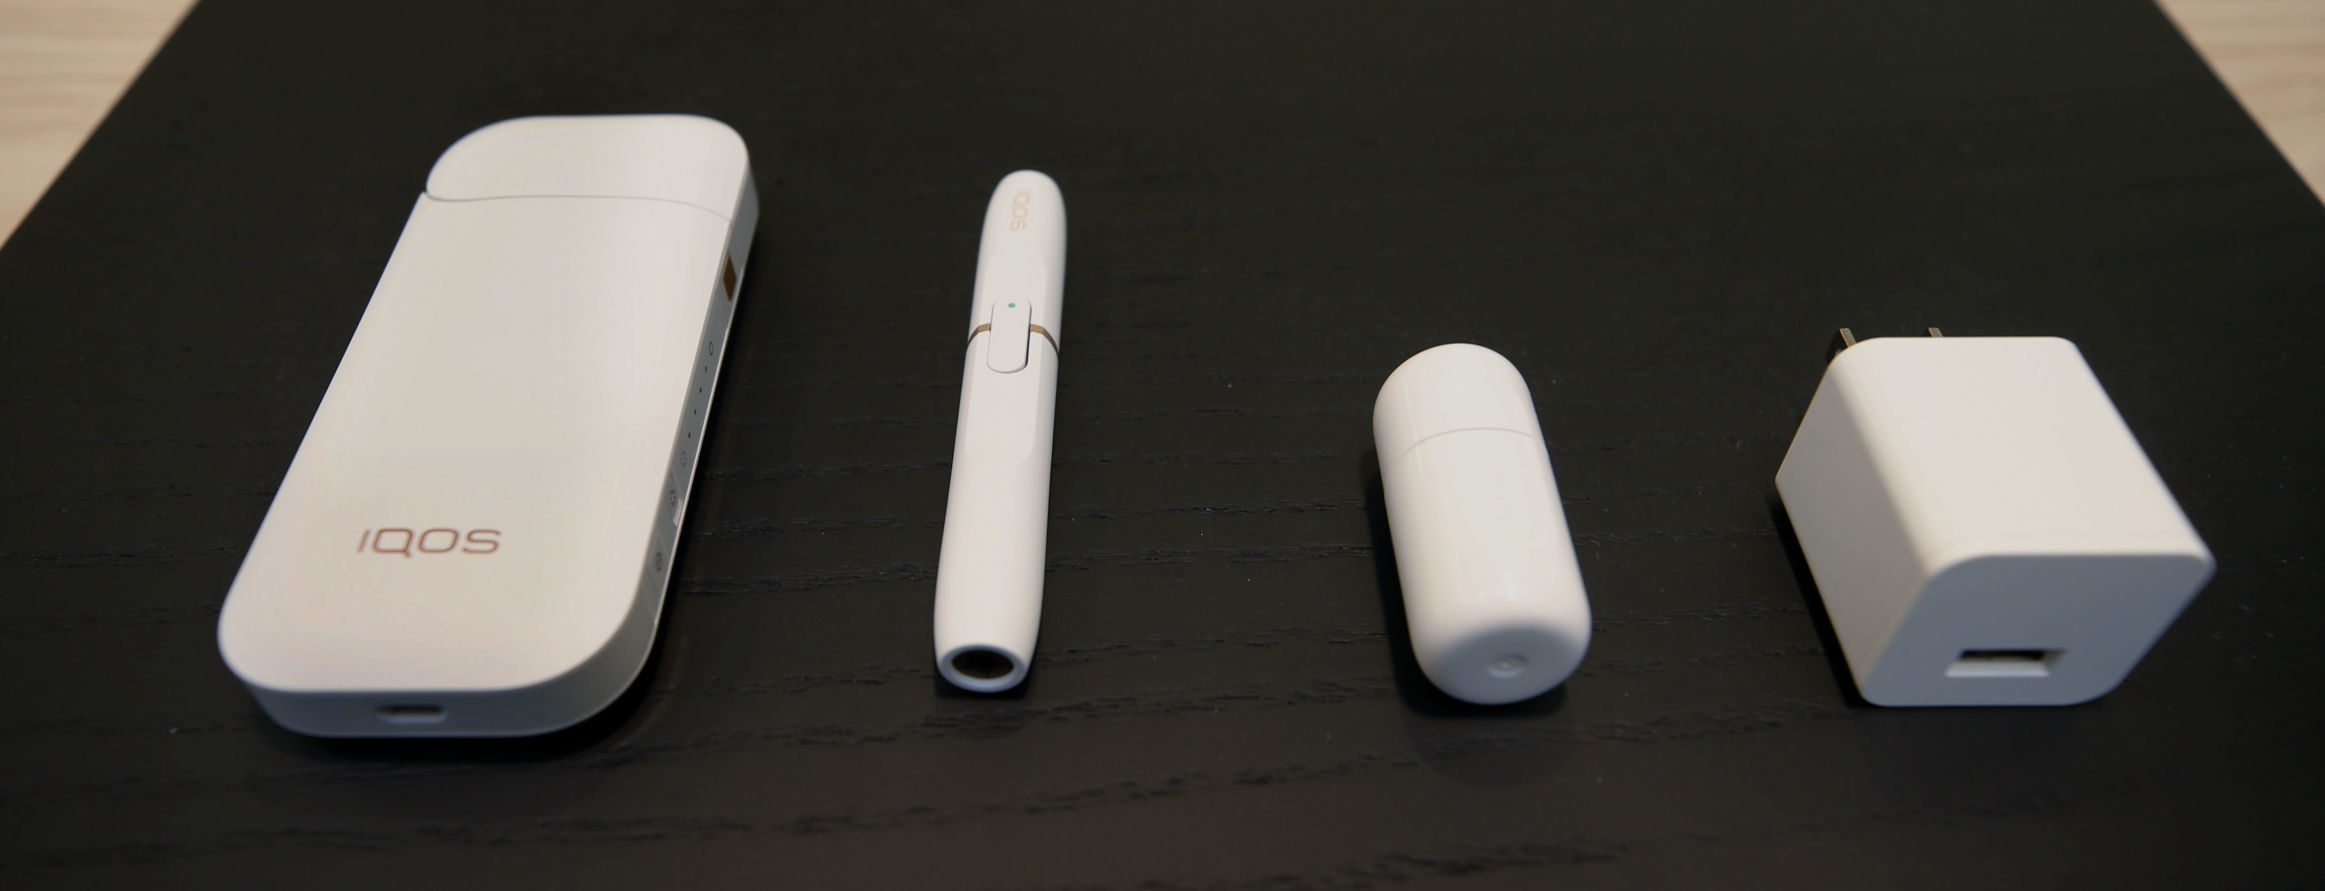 Altria expanding test market for iQOS 'heat not burn' device to 